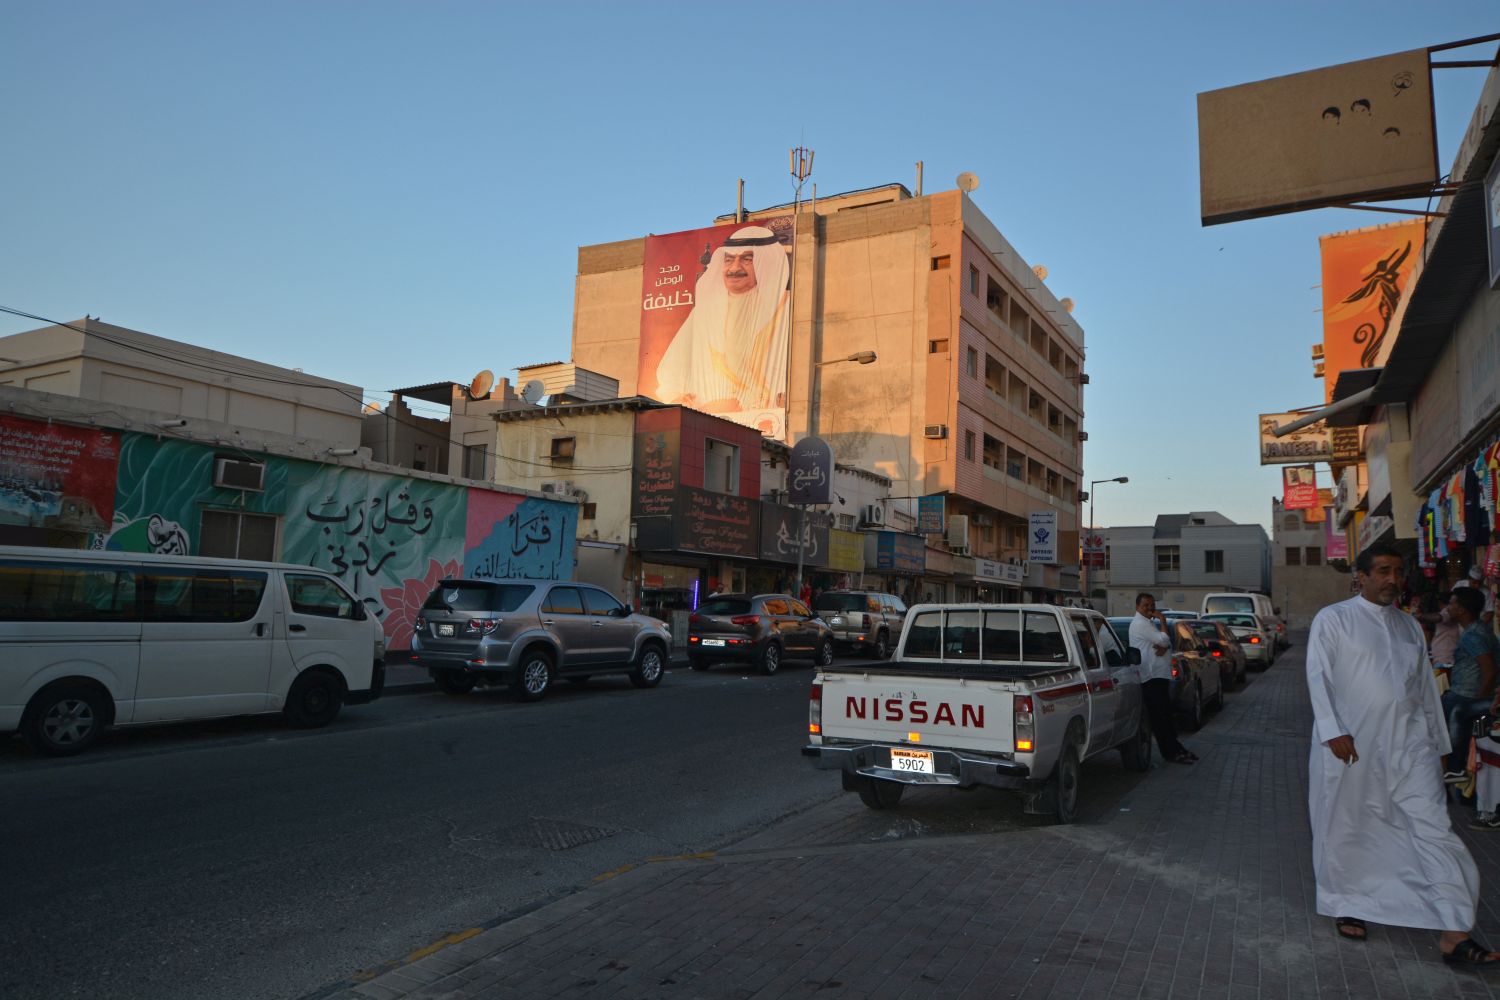 Street view with local businesses and pedestrians in Muharraq.